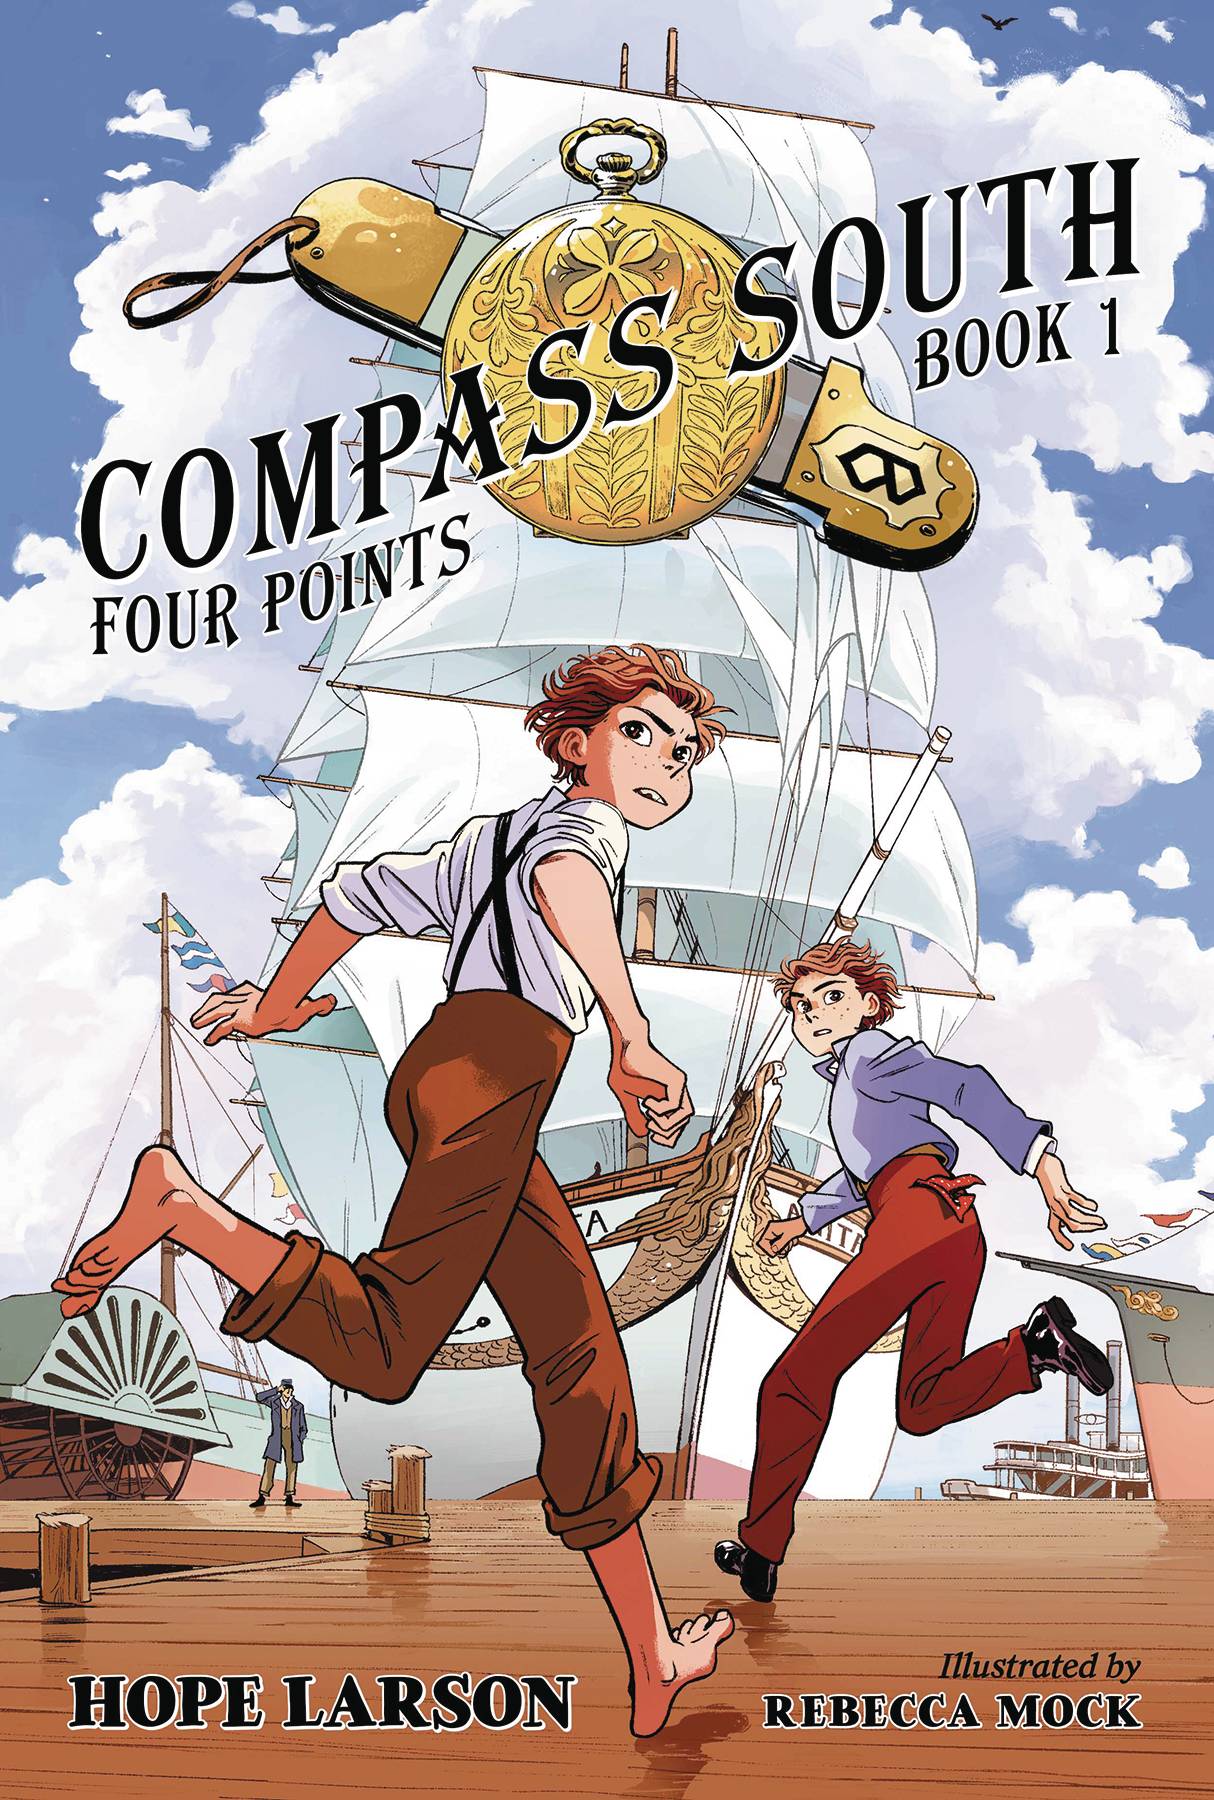 Four Points Book 1: Compass South s/c